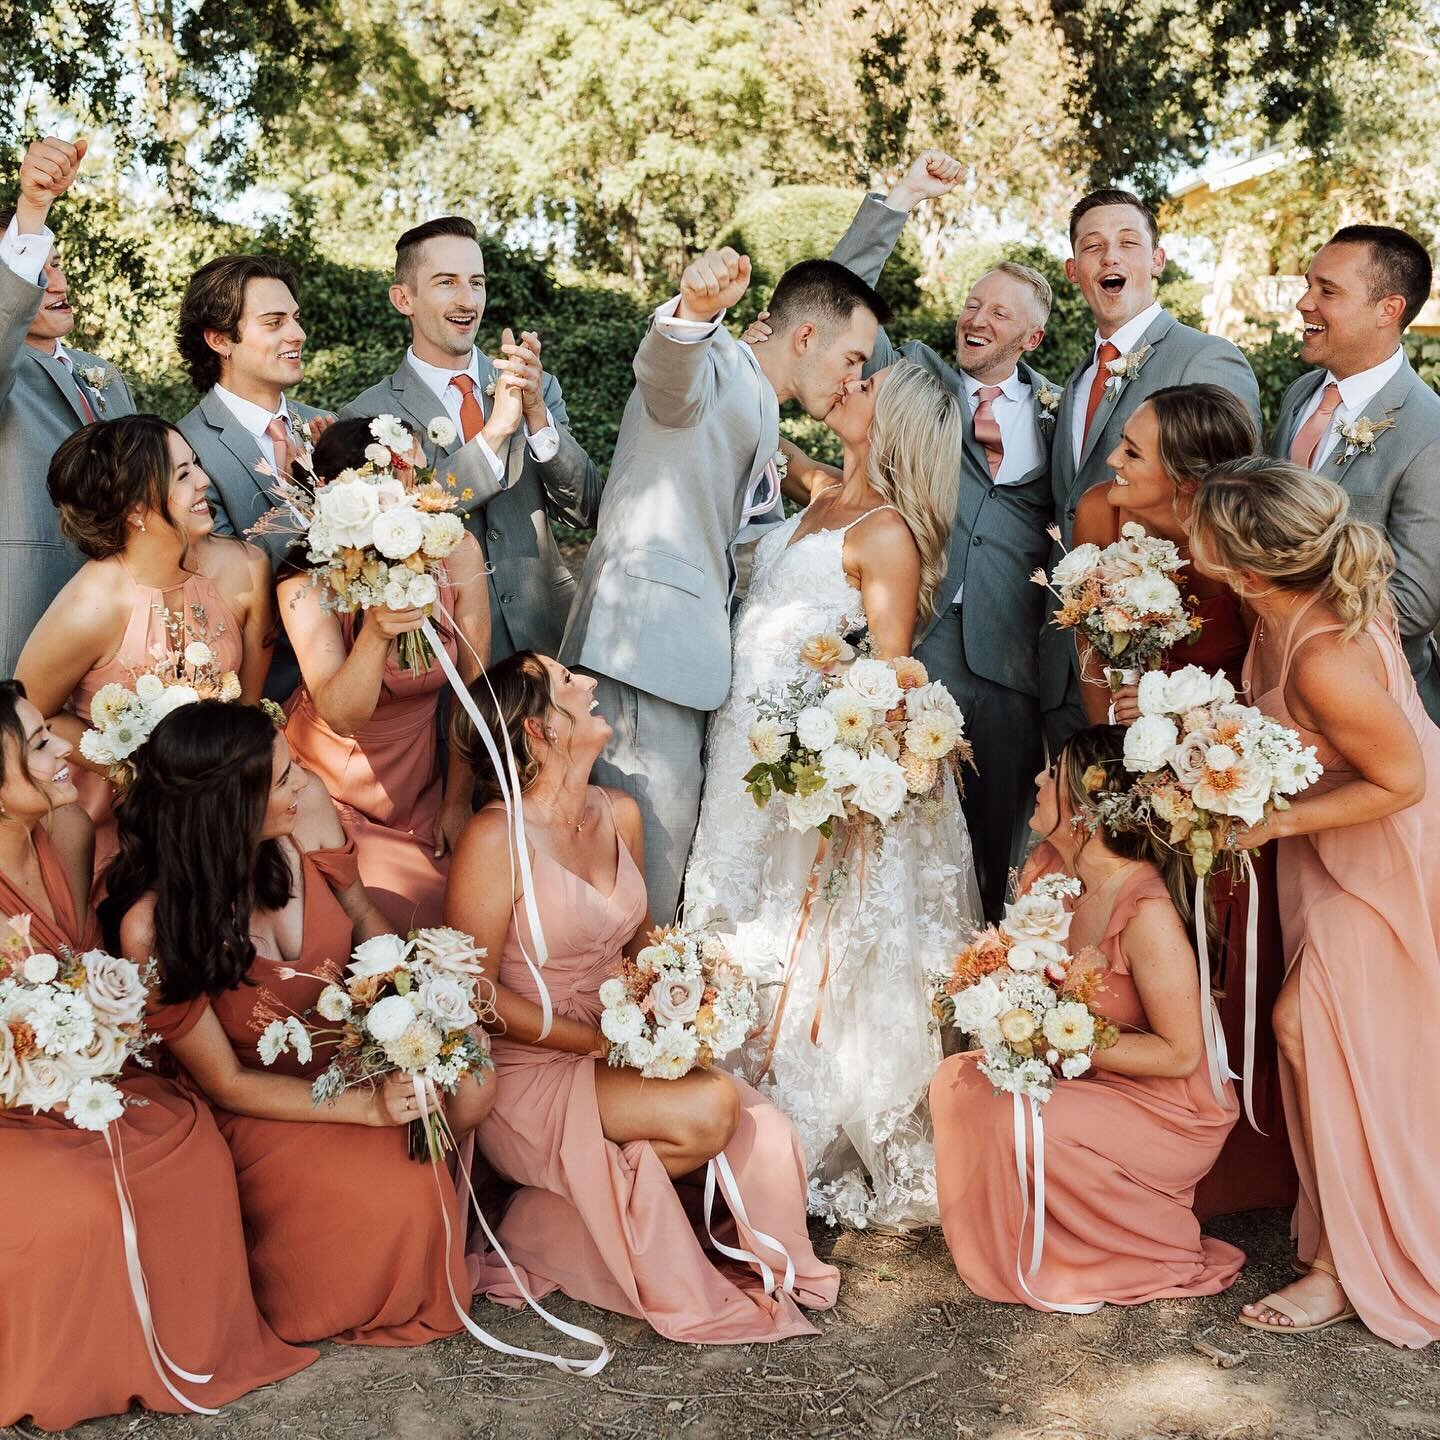 Summer weddings in the vineyards are almost here!! Looking forward to being back at Scribner Bend - the cutest winery tucked into the Sacramento River 🤩

-
Photography: @nicolaleighphoto
HMU: @summerbridalbeauty @kayleigh_rootssalonsuite
Floral: @ja